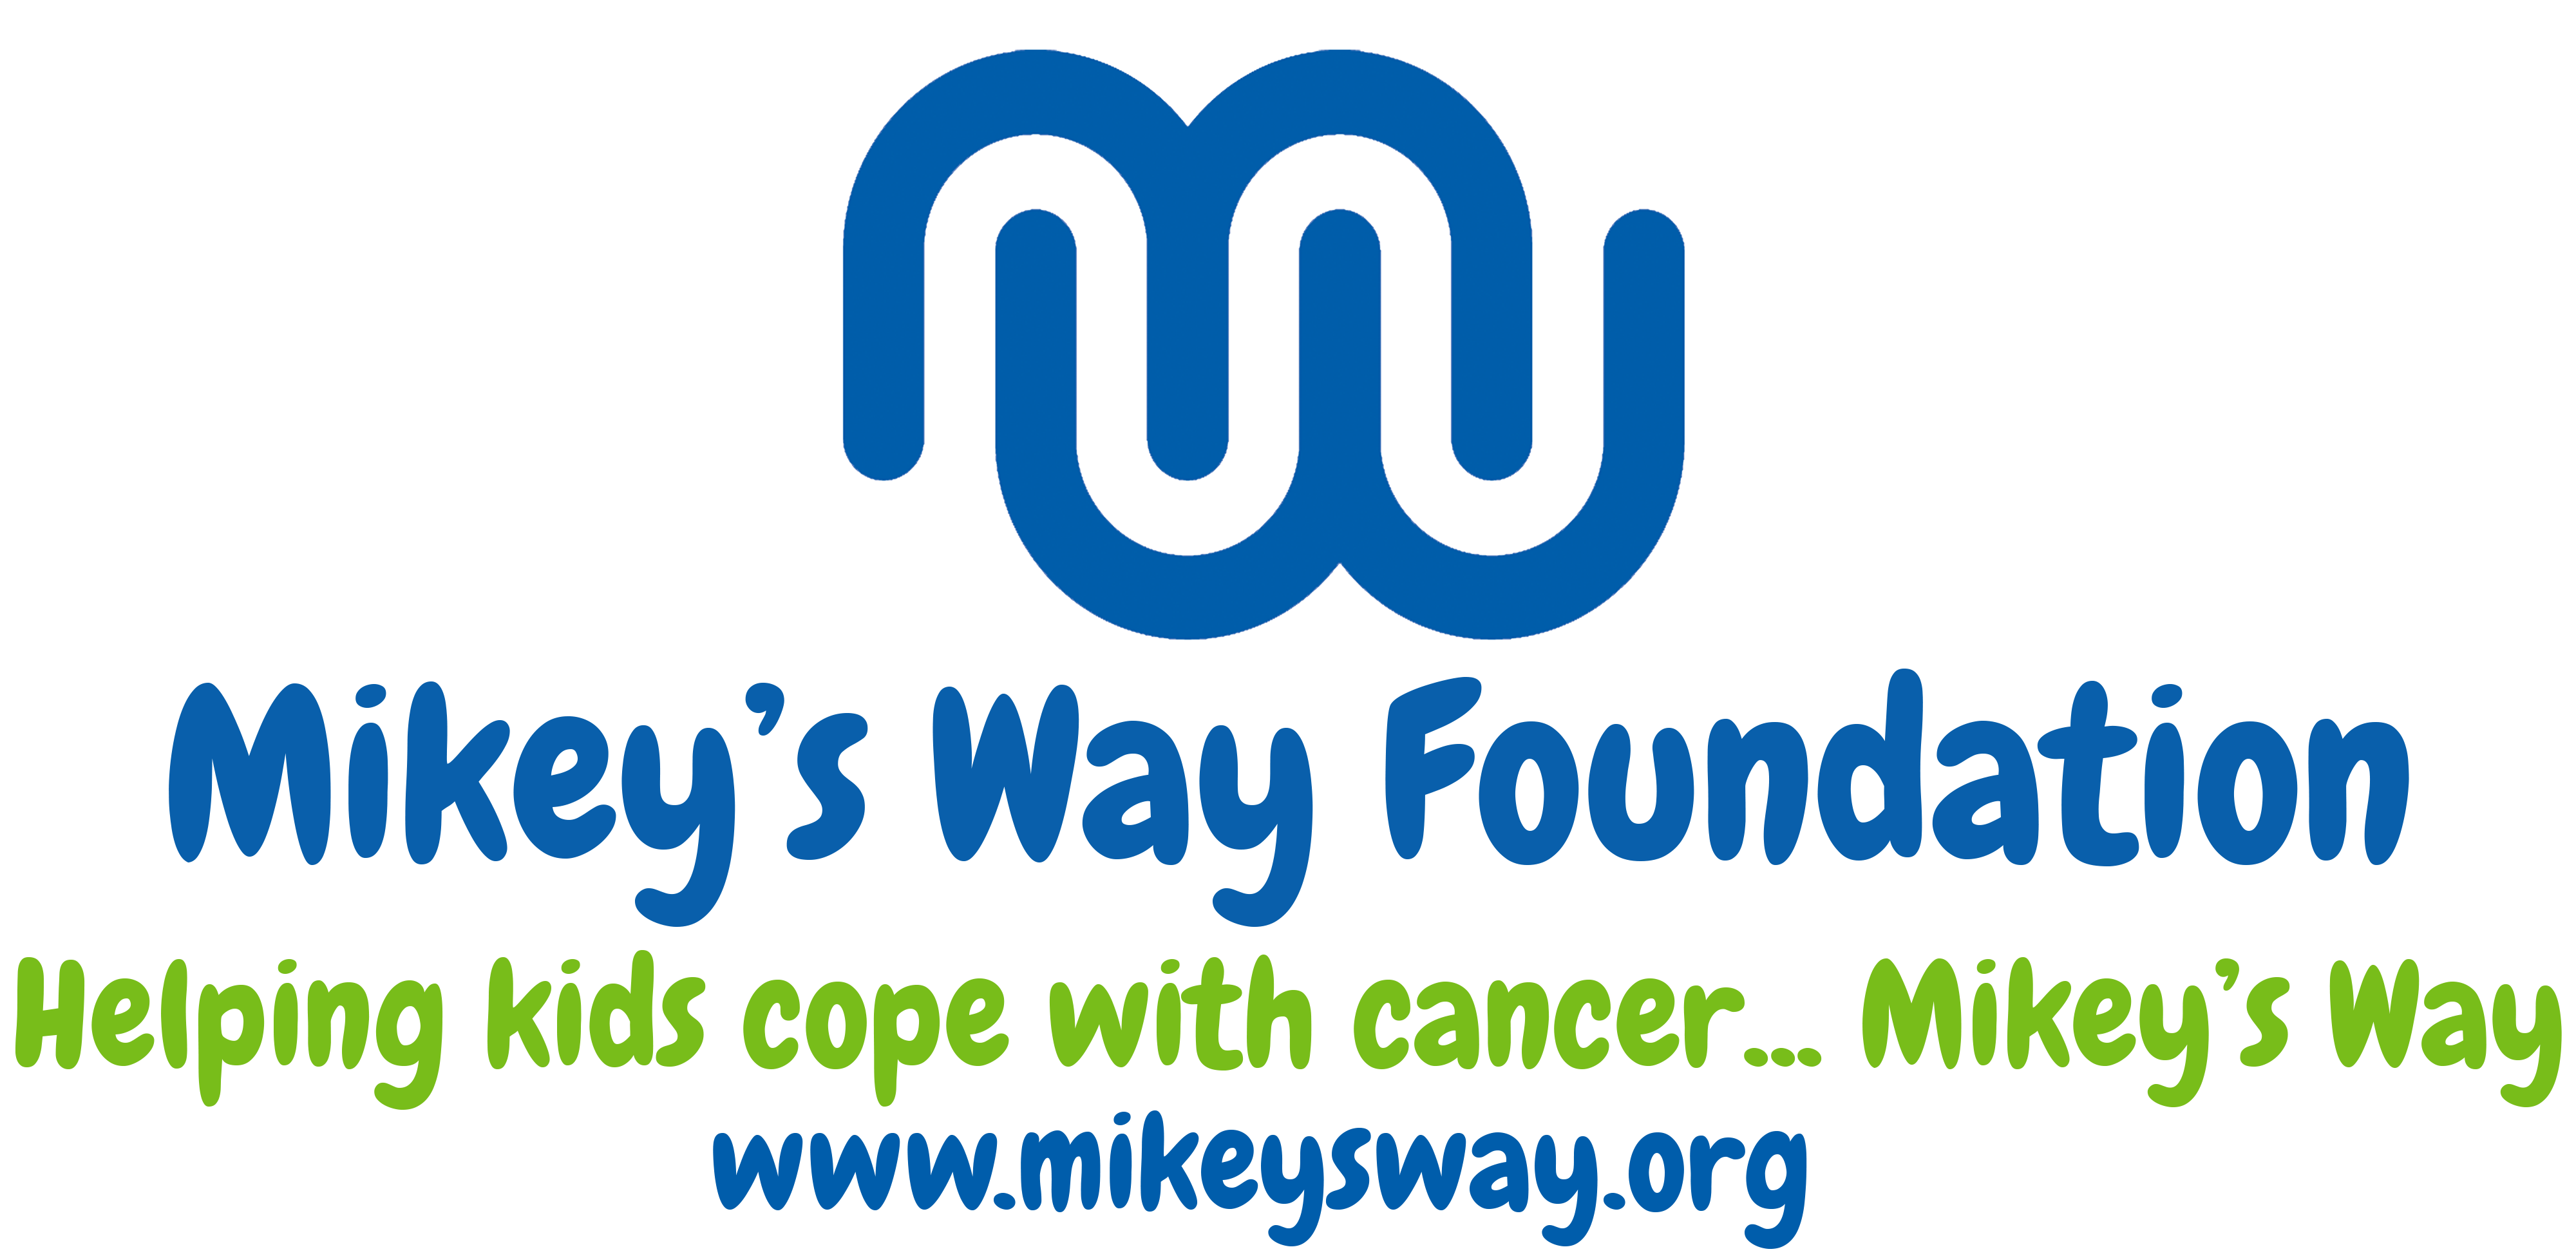 Helping kids cope with cancer... Mikey's Way